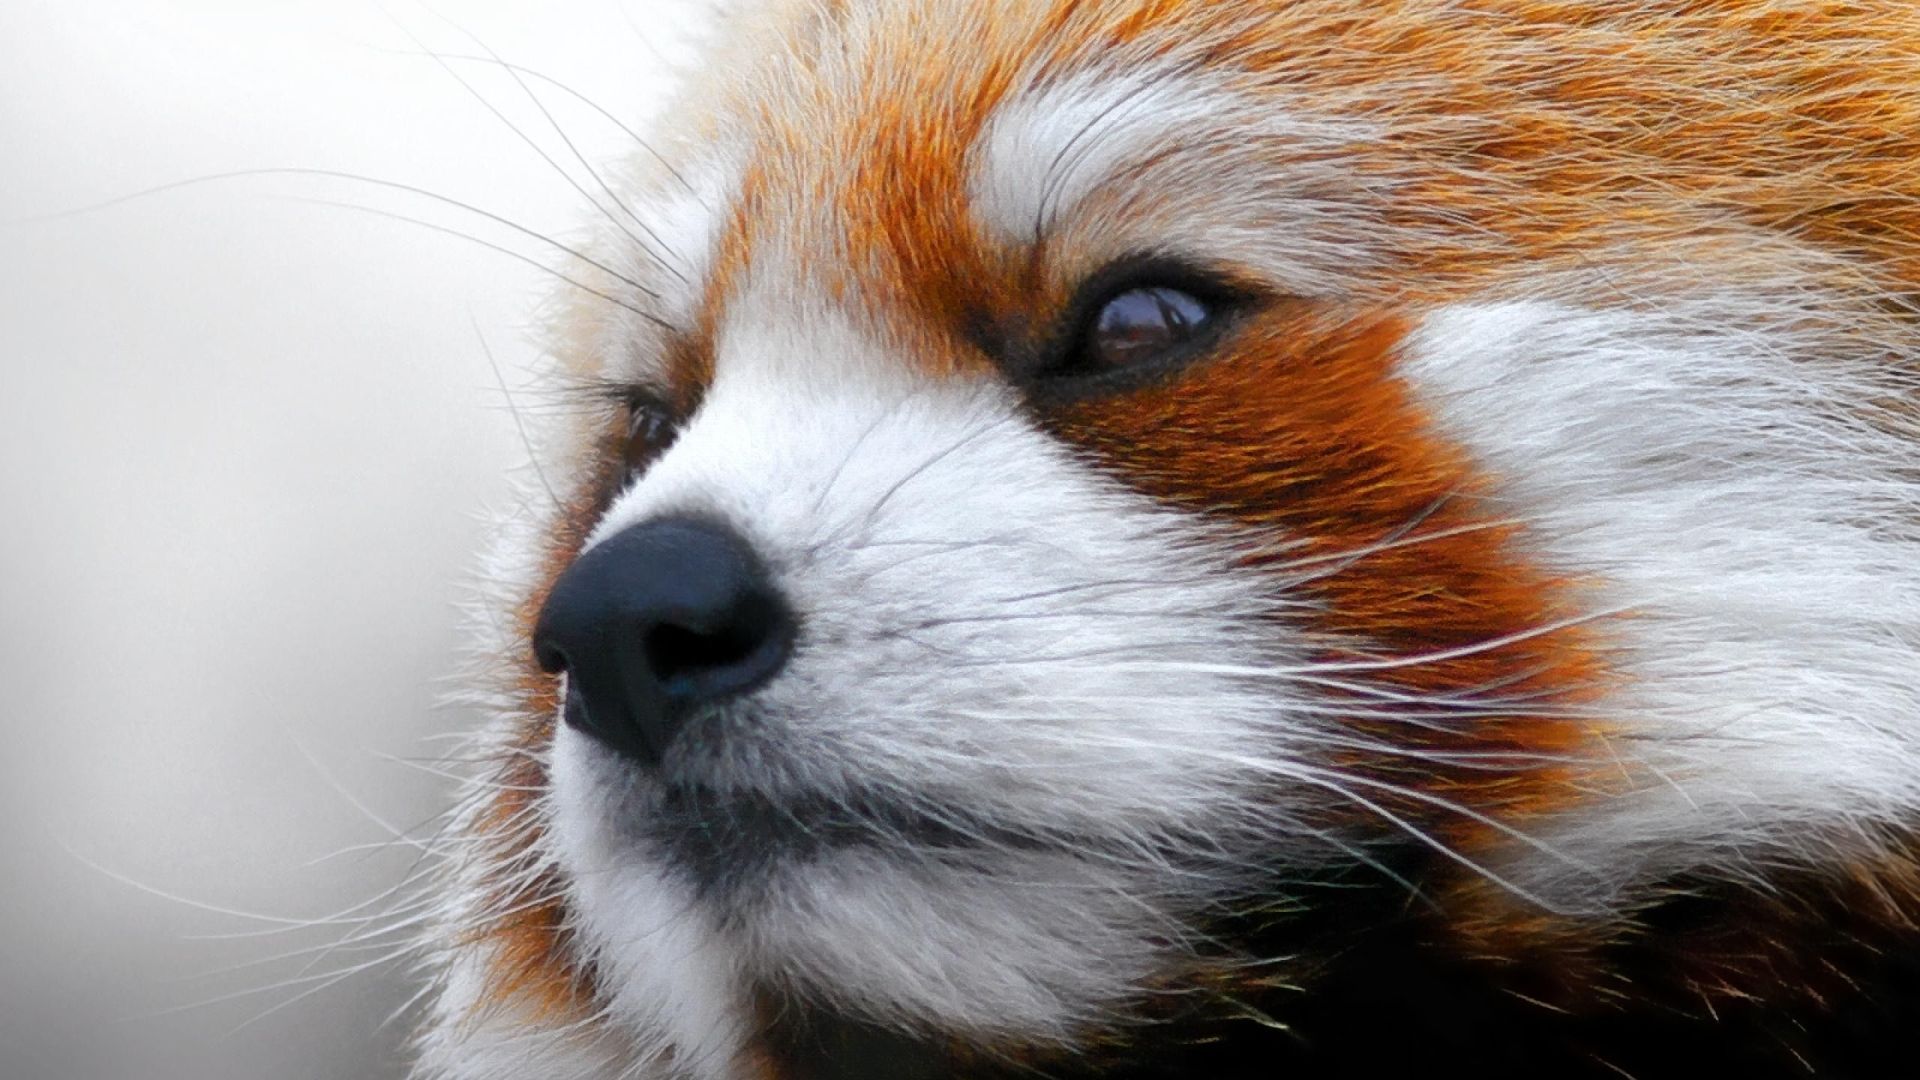 Desktop Wallpaper Red Panda's Cute Face, HD Image, Picture, Background, Df7uwy